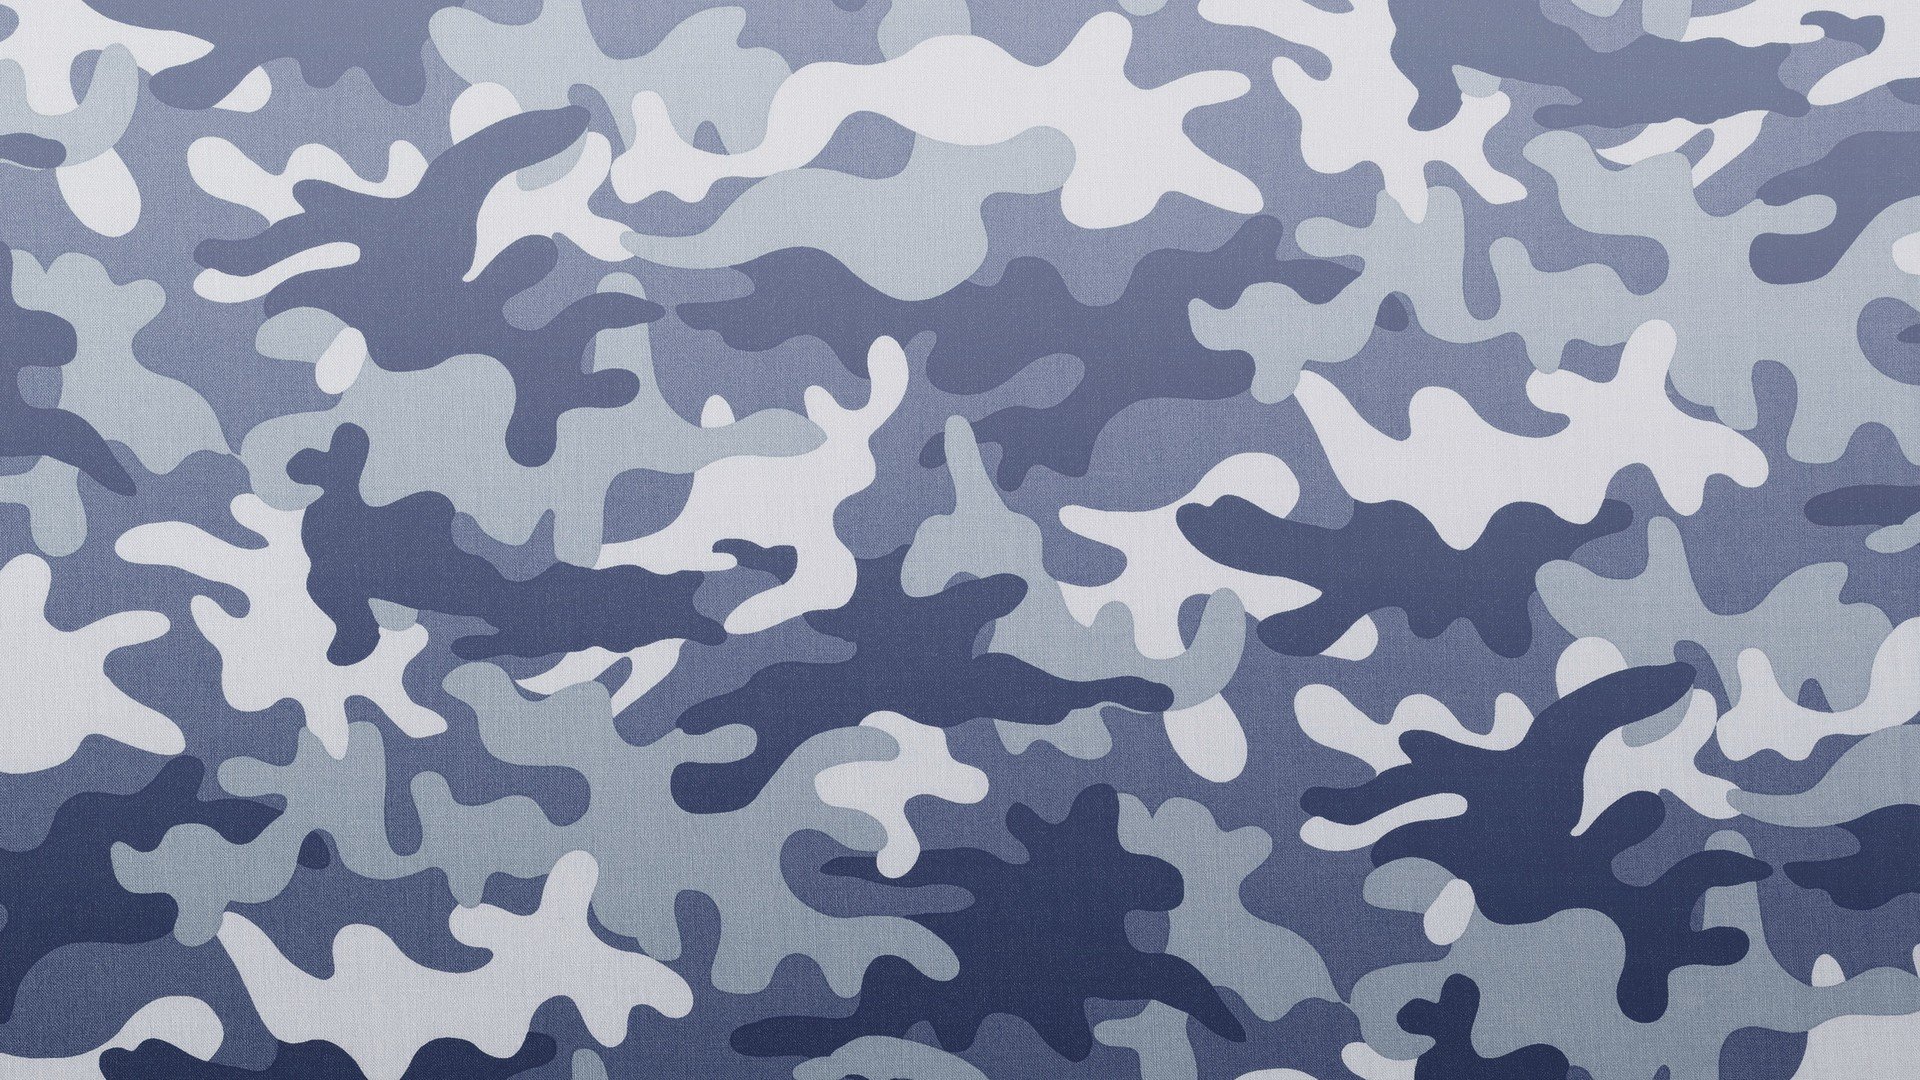 minimalistic, Army, Patterns, Vectors, Templates, Camouflage, Moro Wallpaper